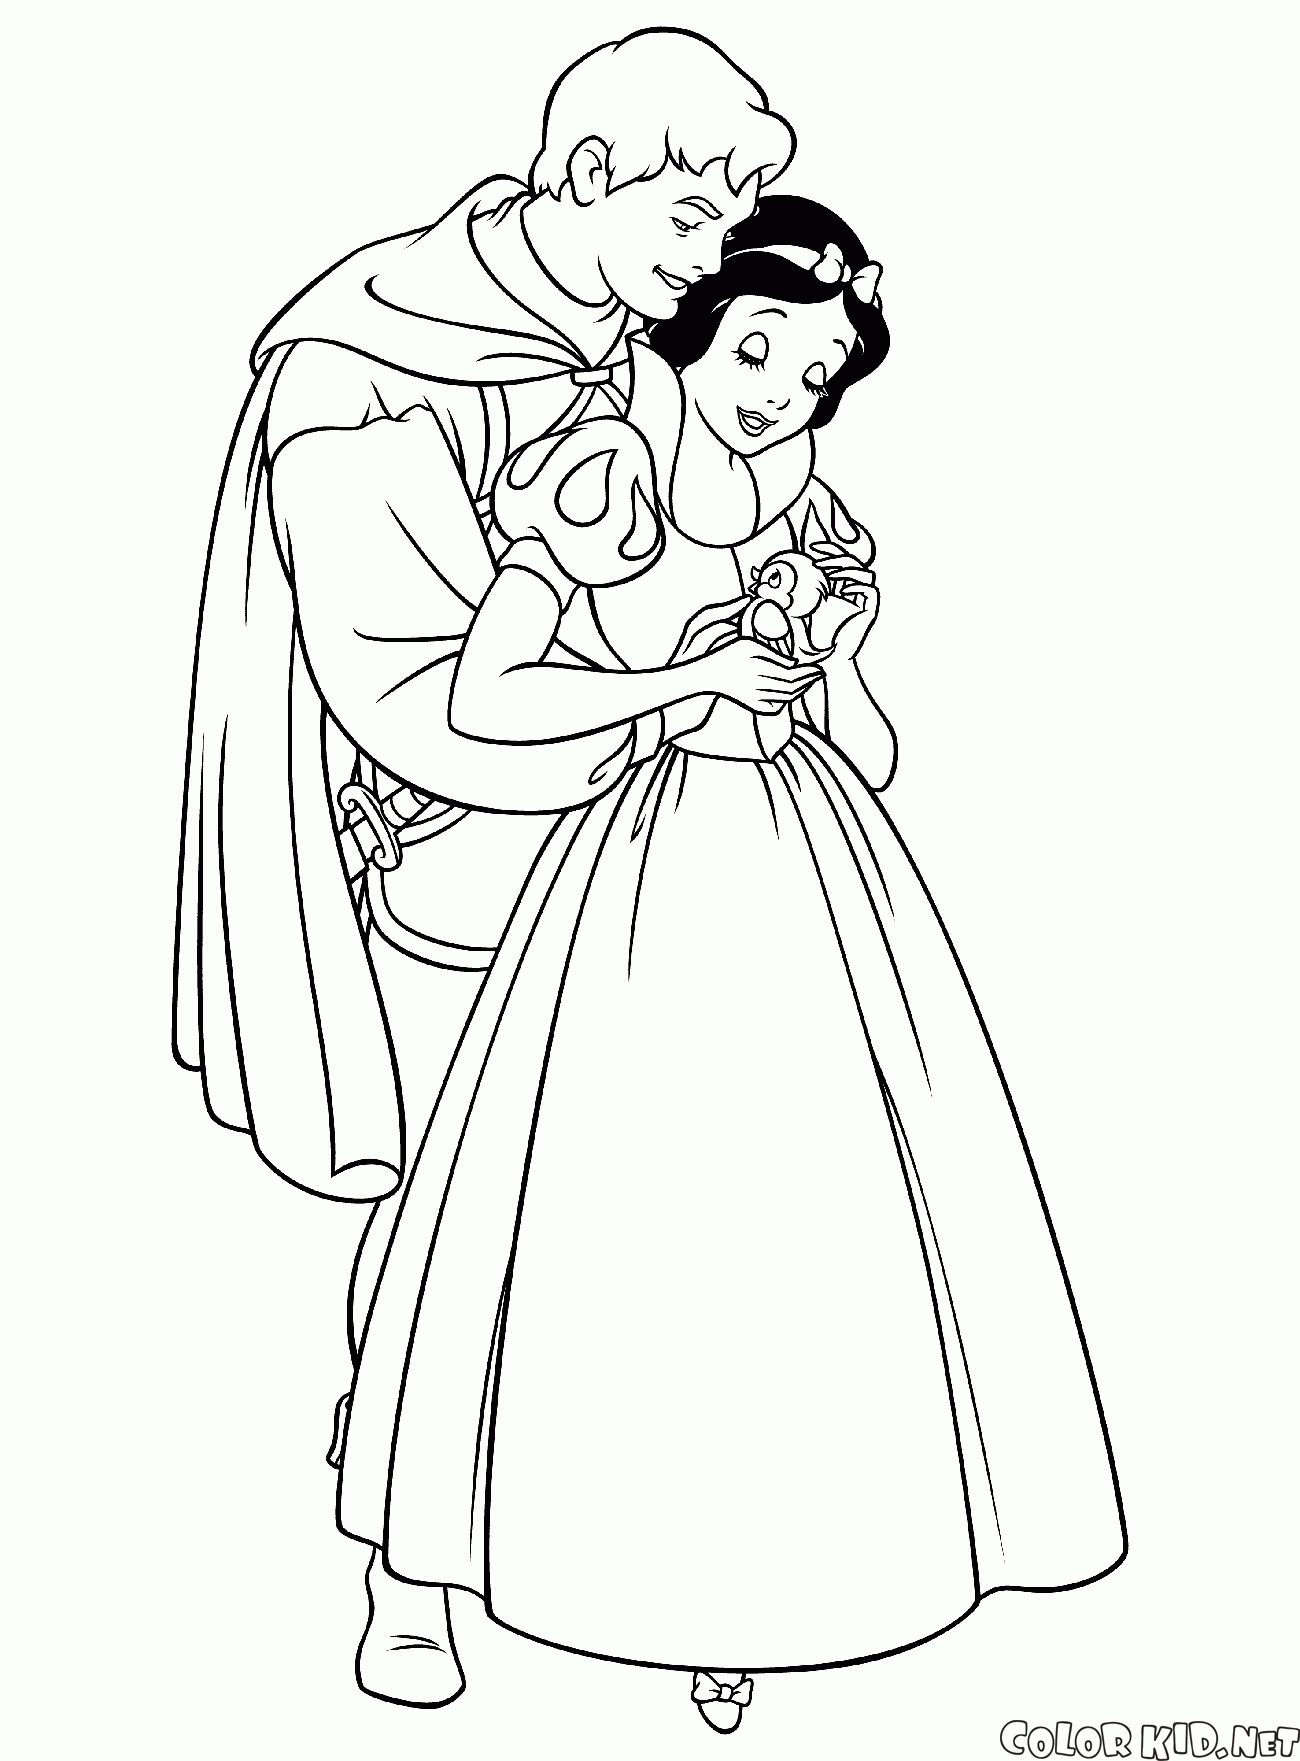 Coloring page - Snow White and the prince of love